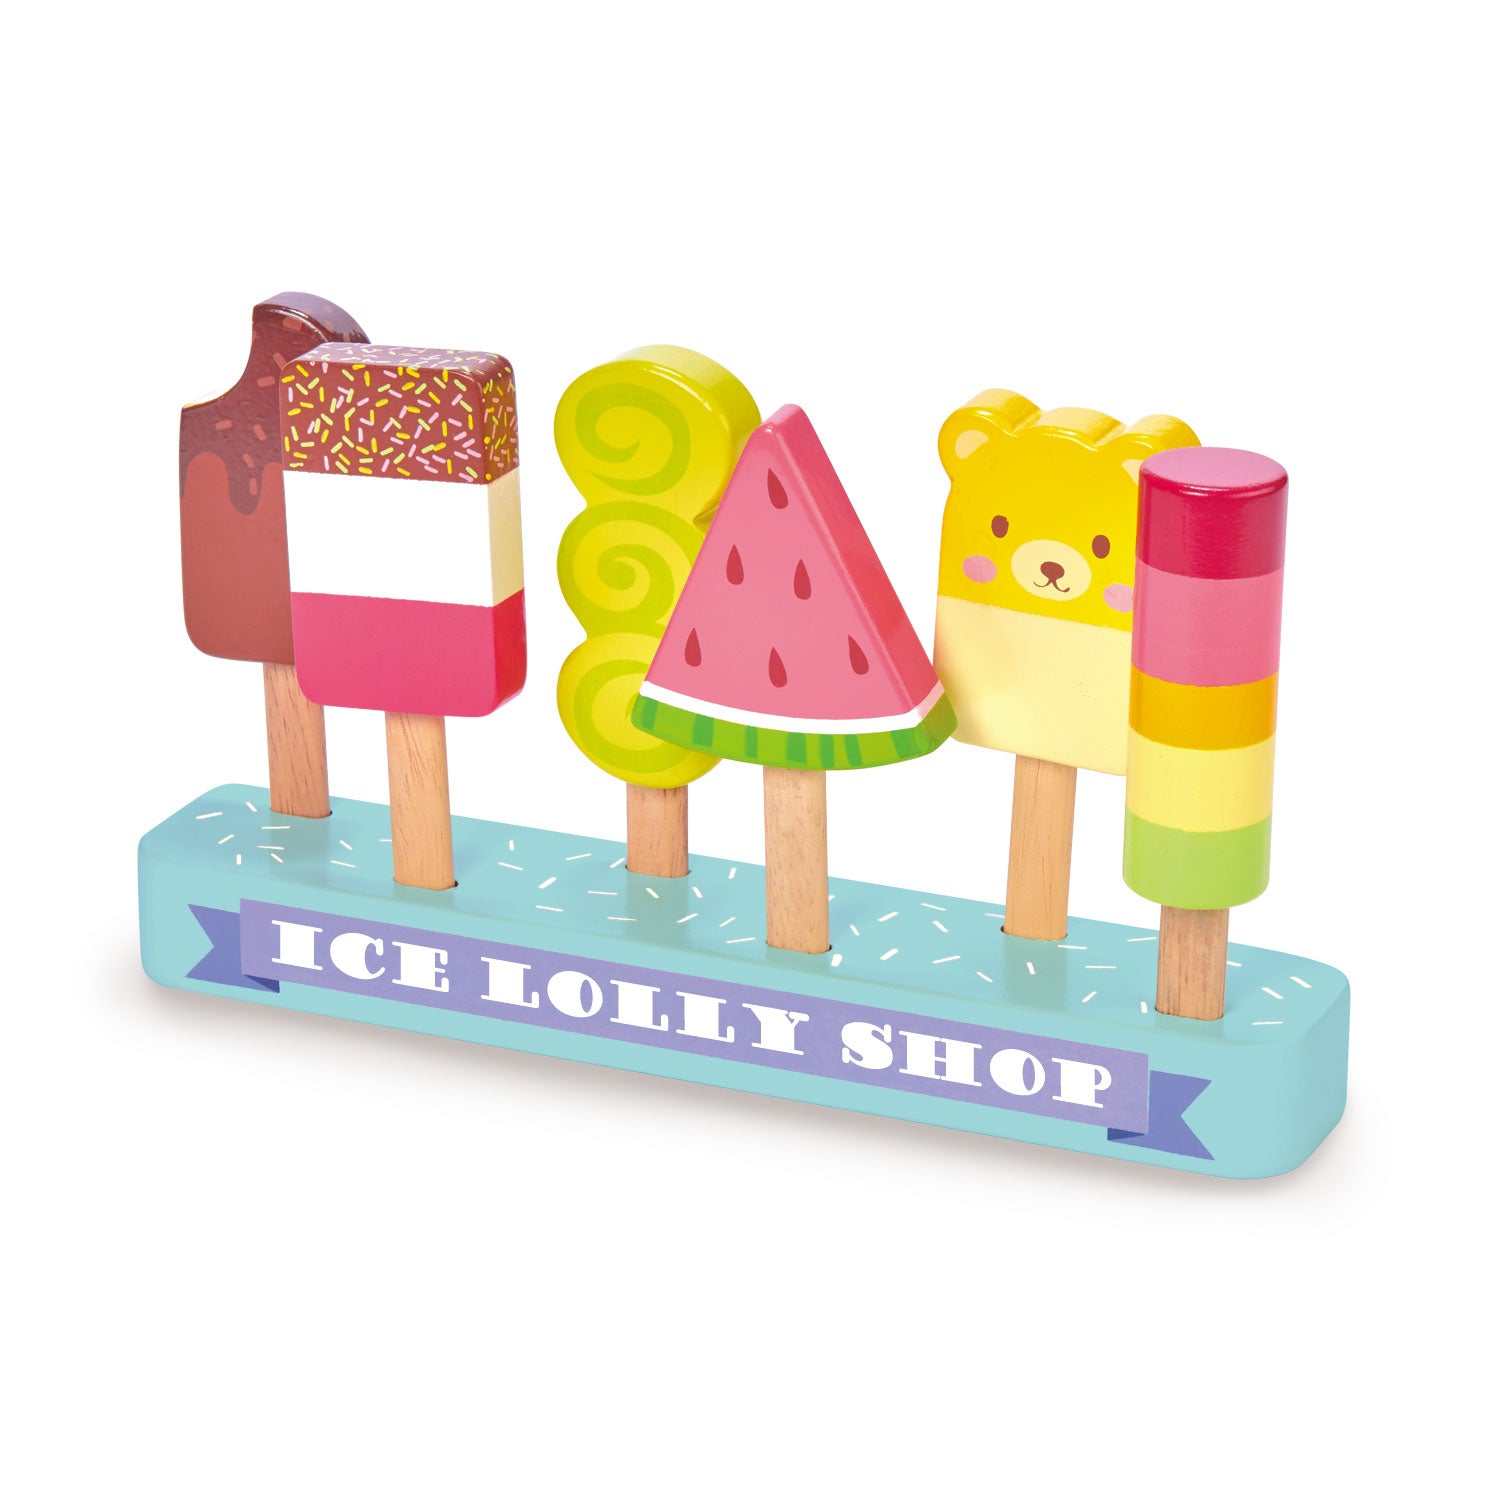 <p>A fun and fabulous Ice lolly Shop! 6 delicious and different flavored ice lollies all made from solid rubberwood and painted in yummy colors. All the sticks are removable and have a sweet little message printed on the hidden part. Mix and match and play a guessing game with friends. </p>
<p>Age range: 3 Years And Older  </p>
<p>Product size: 8.94 x 1.77 x 5.08”  </p>
<p>Weight: 0.68 lbs</p>
<p><a href="https://www.dropbox.com/s/lwpkro884410ewv/TL8236%20Ice%20Lolly%20Printable.pdf?dl=0" title="Ice Lolly Printable"><img src="https://cdn.shopify.com/s/files/1/1083/1780/files/TL8236-Ice-Lolly-Printable-dl_480x480.jpg?v=1599203487" alt="Ice Lolly Printable"></a></p>
